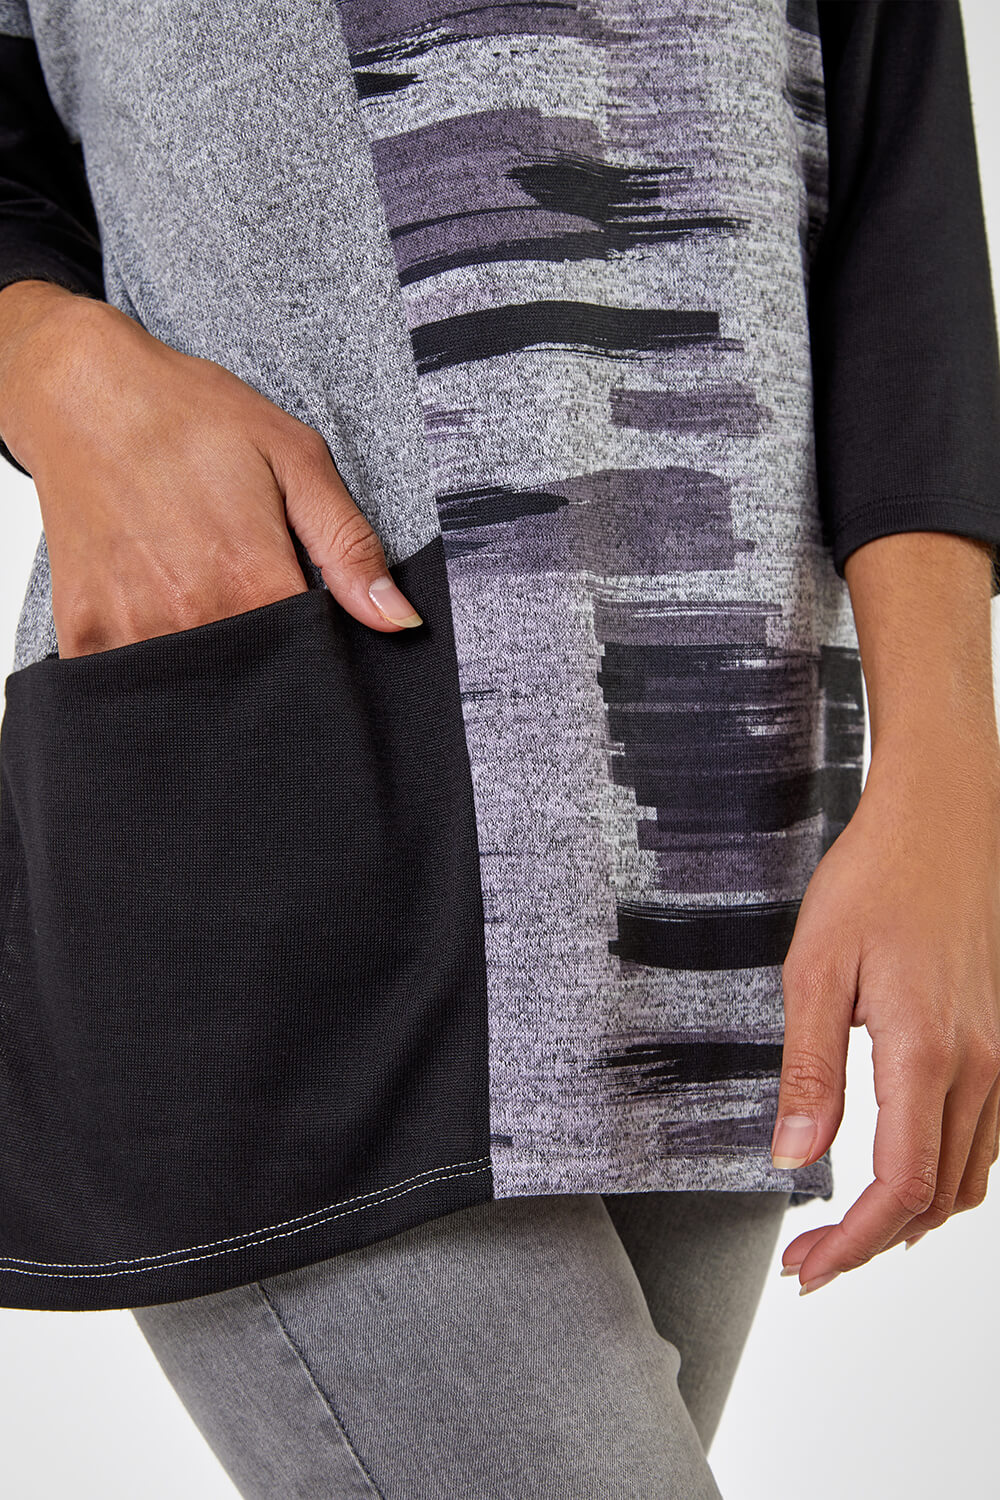 Grey Colour Block Graphic Print Tunic Top, Image 5 of 5